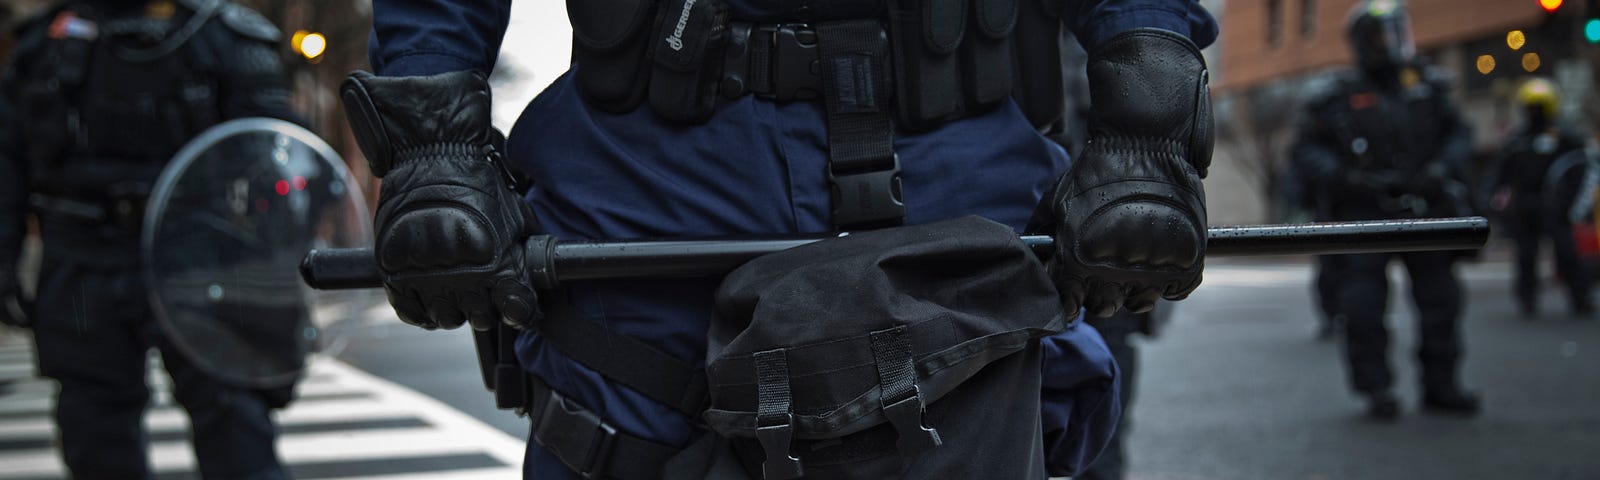 A close-up view of one riot policeman from chest down with long black baton held menacingly across his thighs. He is flanked in the distance with other similarly-clad officers with shields and helmets.